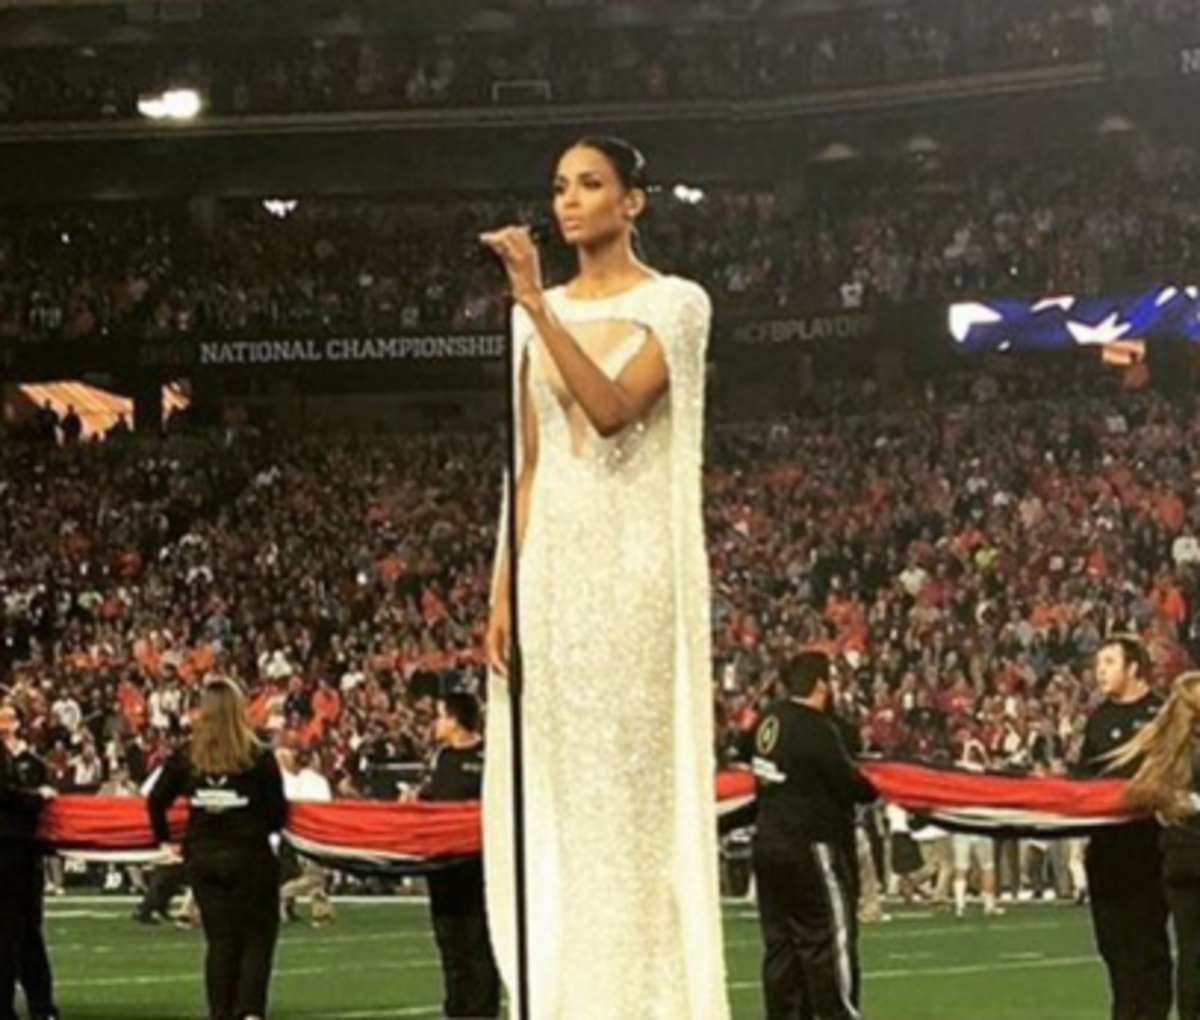 Ciara's dress during the national title.